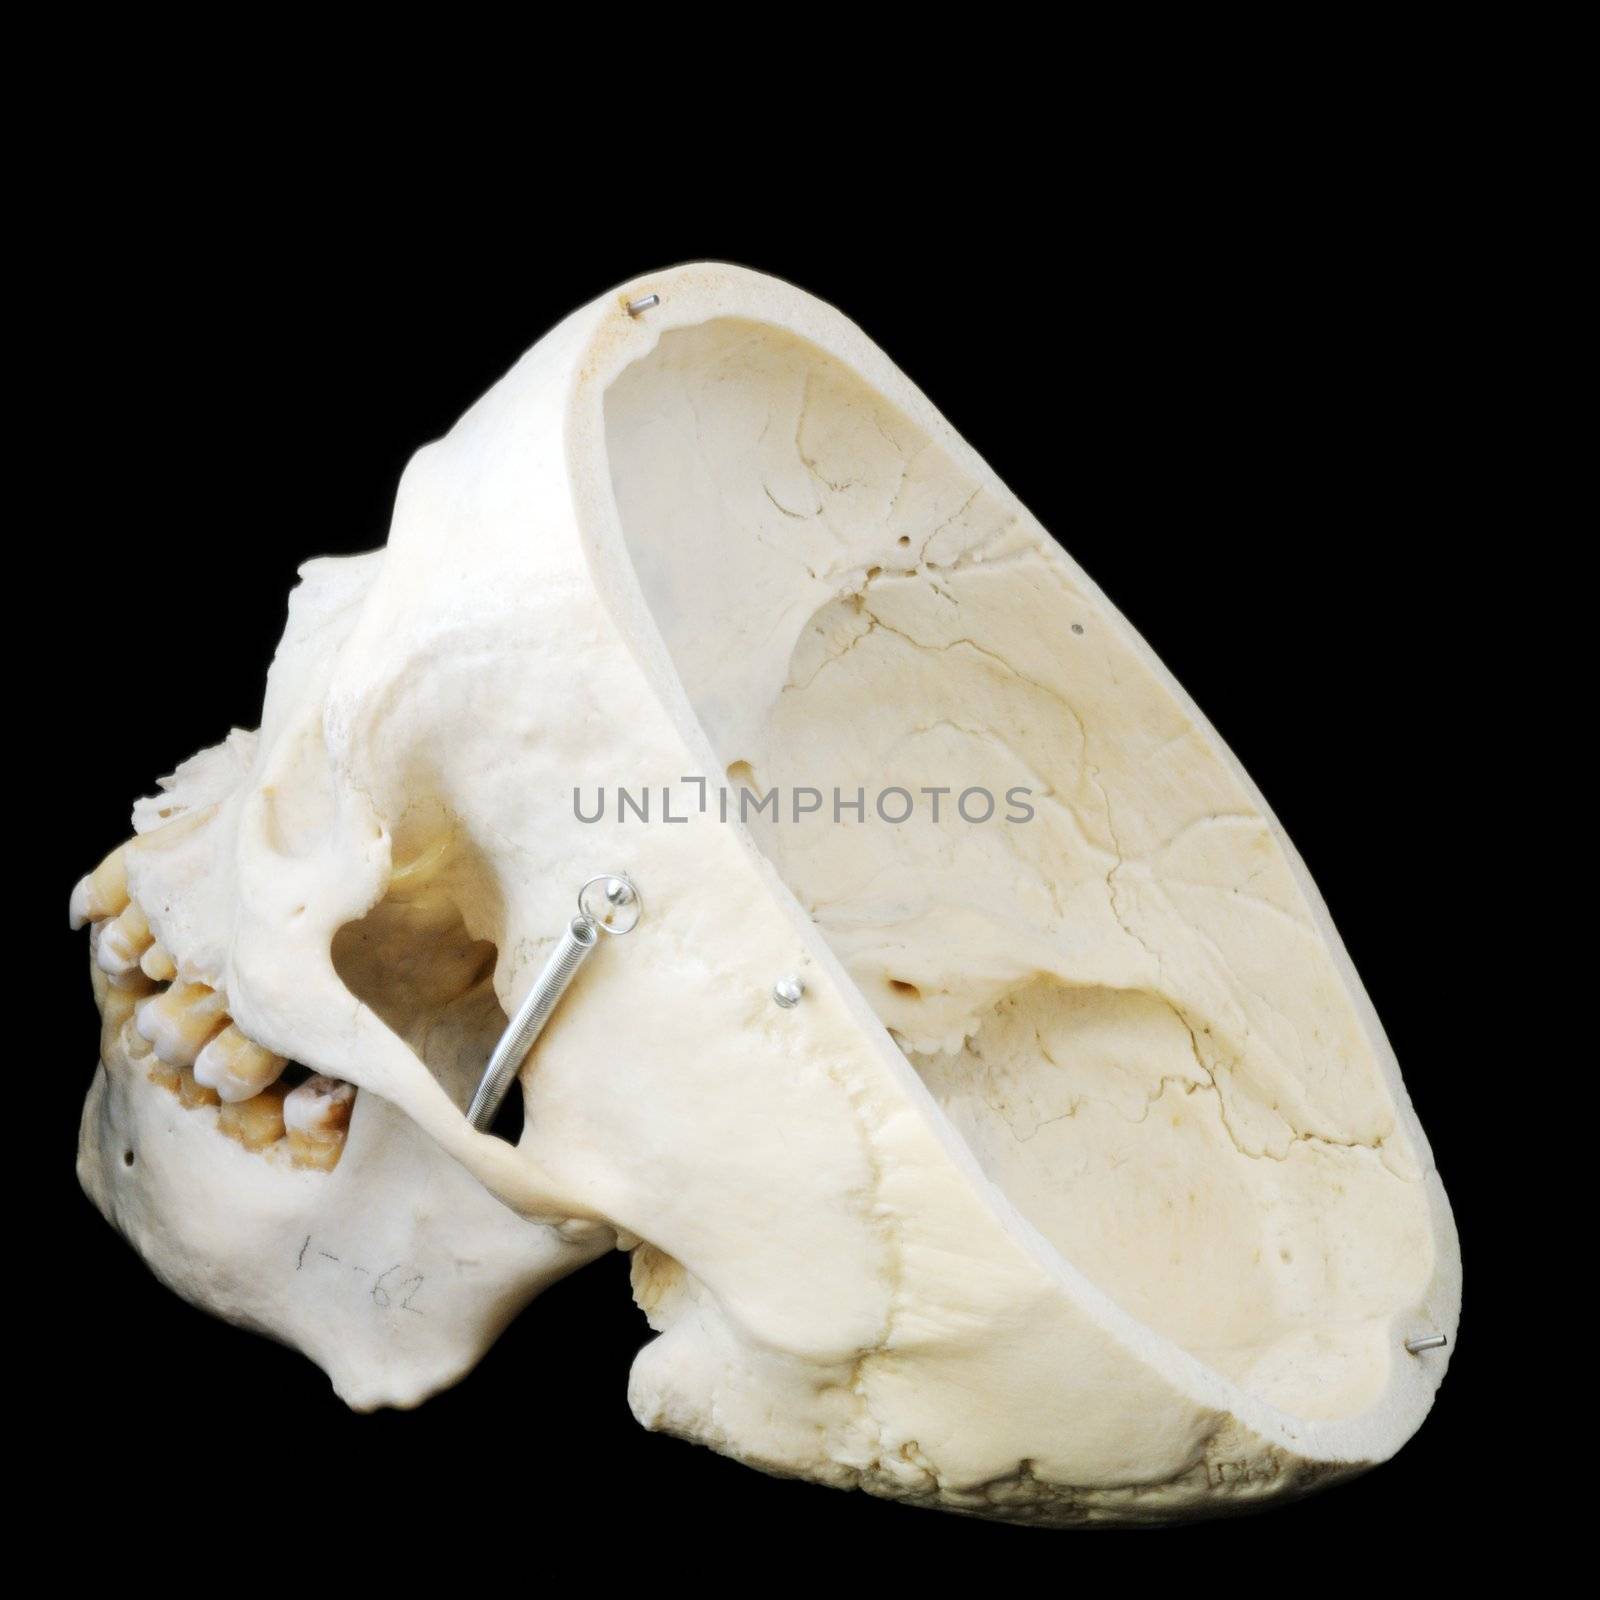 A real human skull with the cap cut away to show the interior of the brain case.